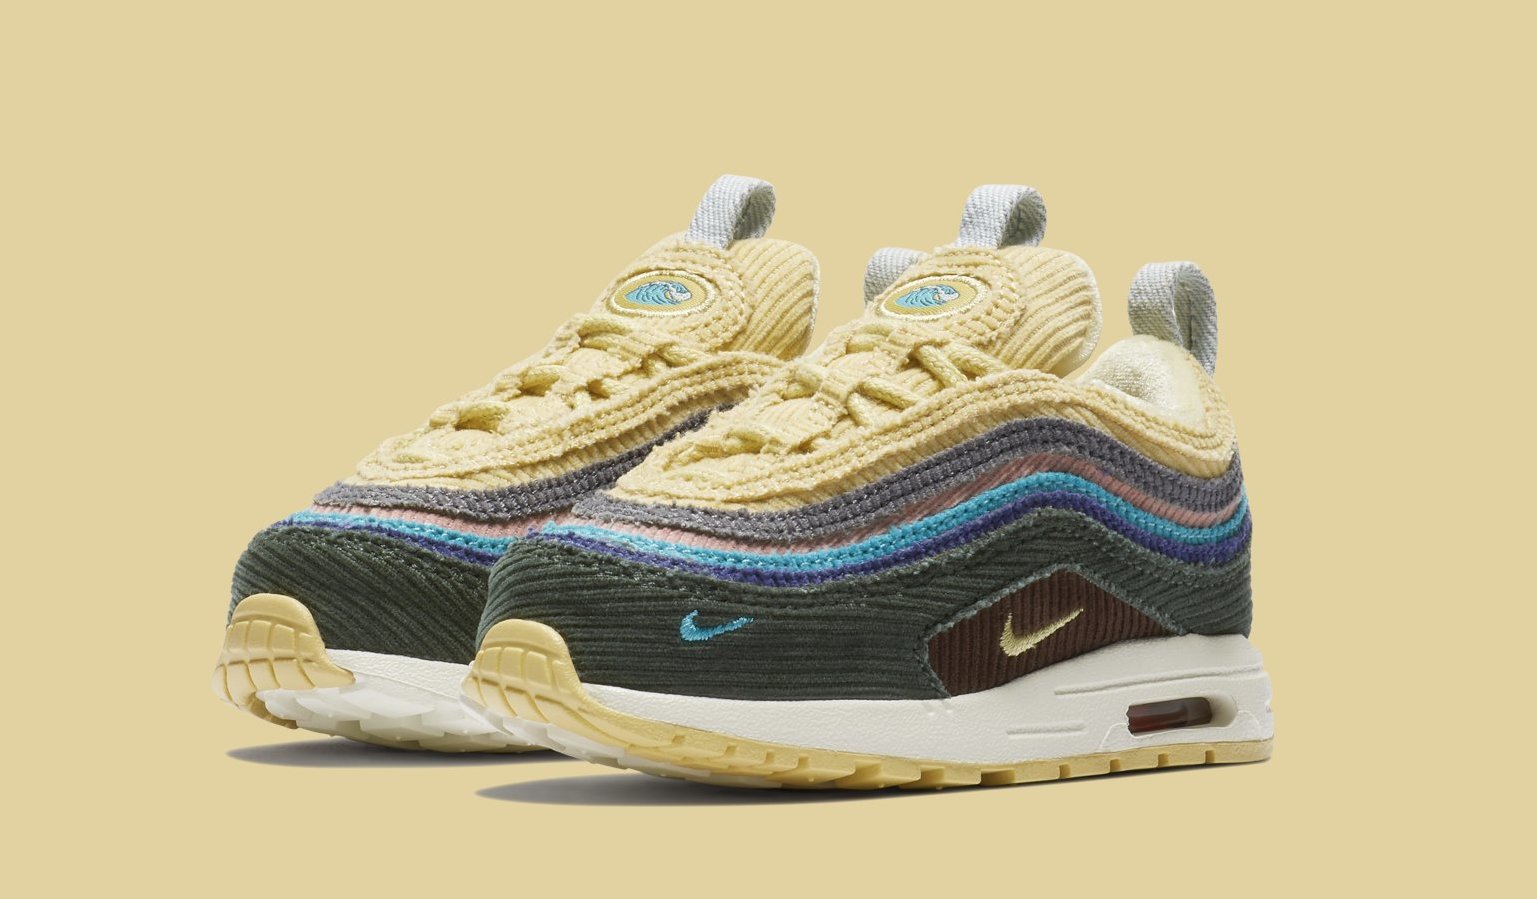 One More Chance at Sean Wotherspoon's Air Max 1/97 | Complex